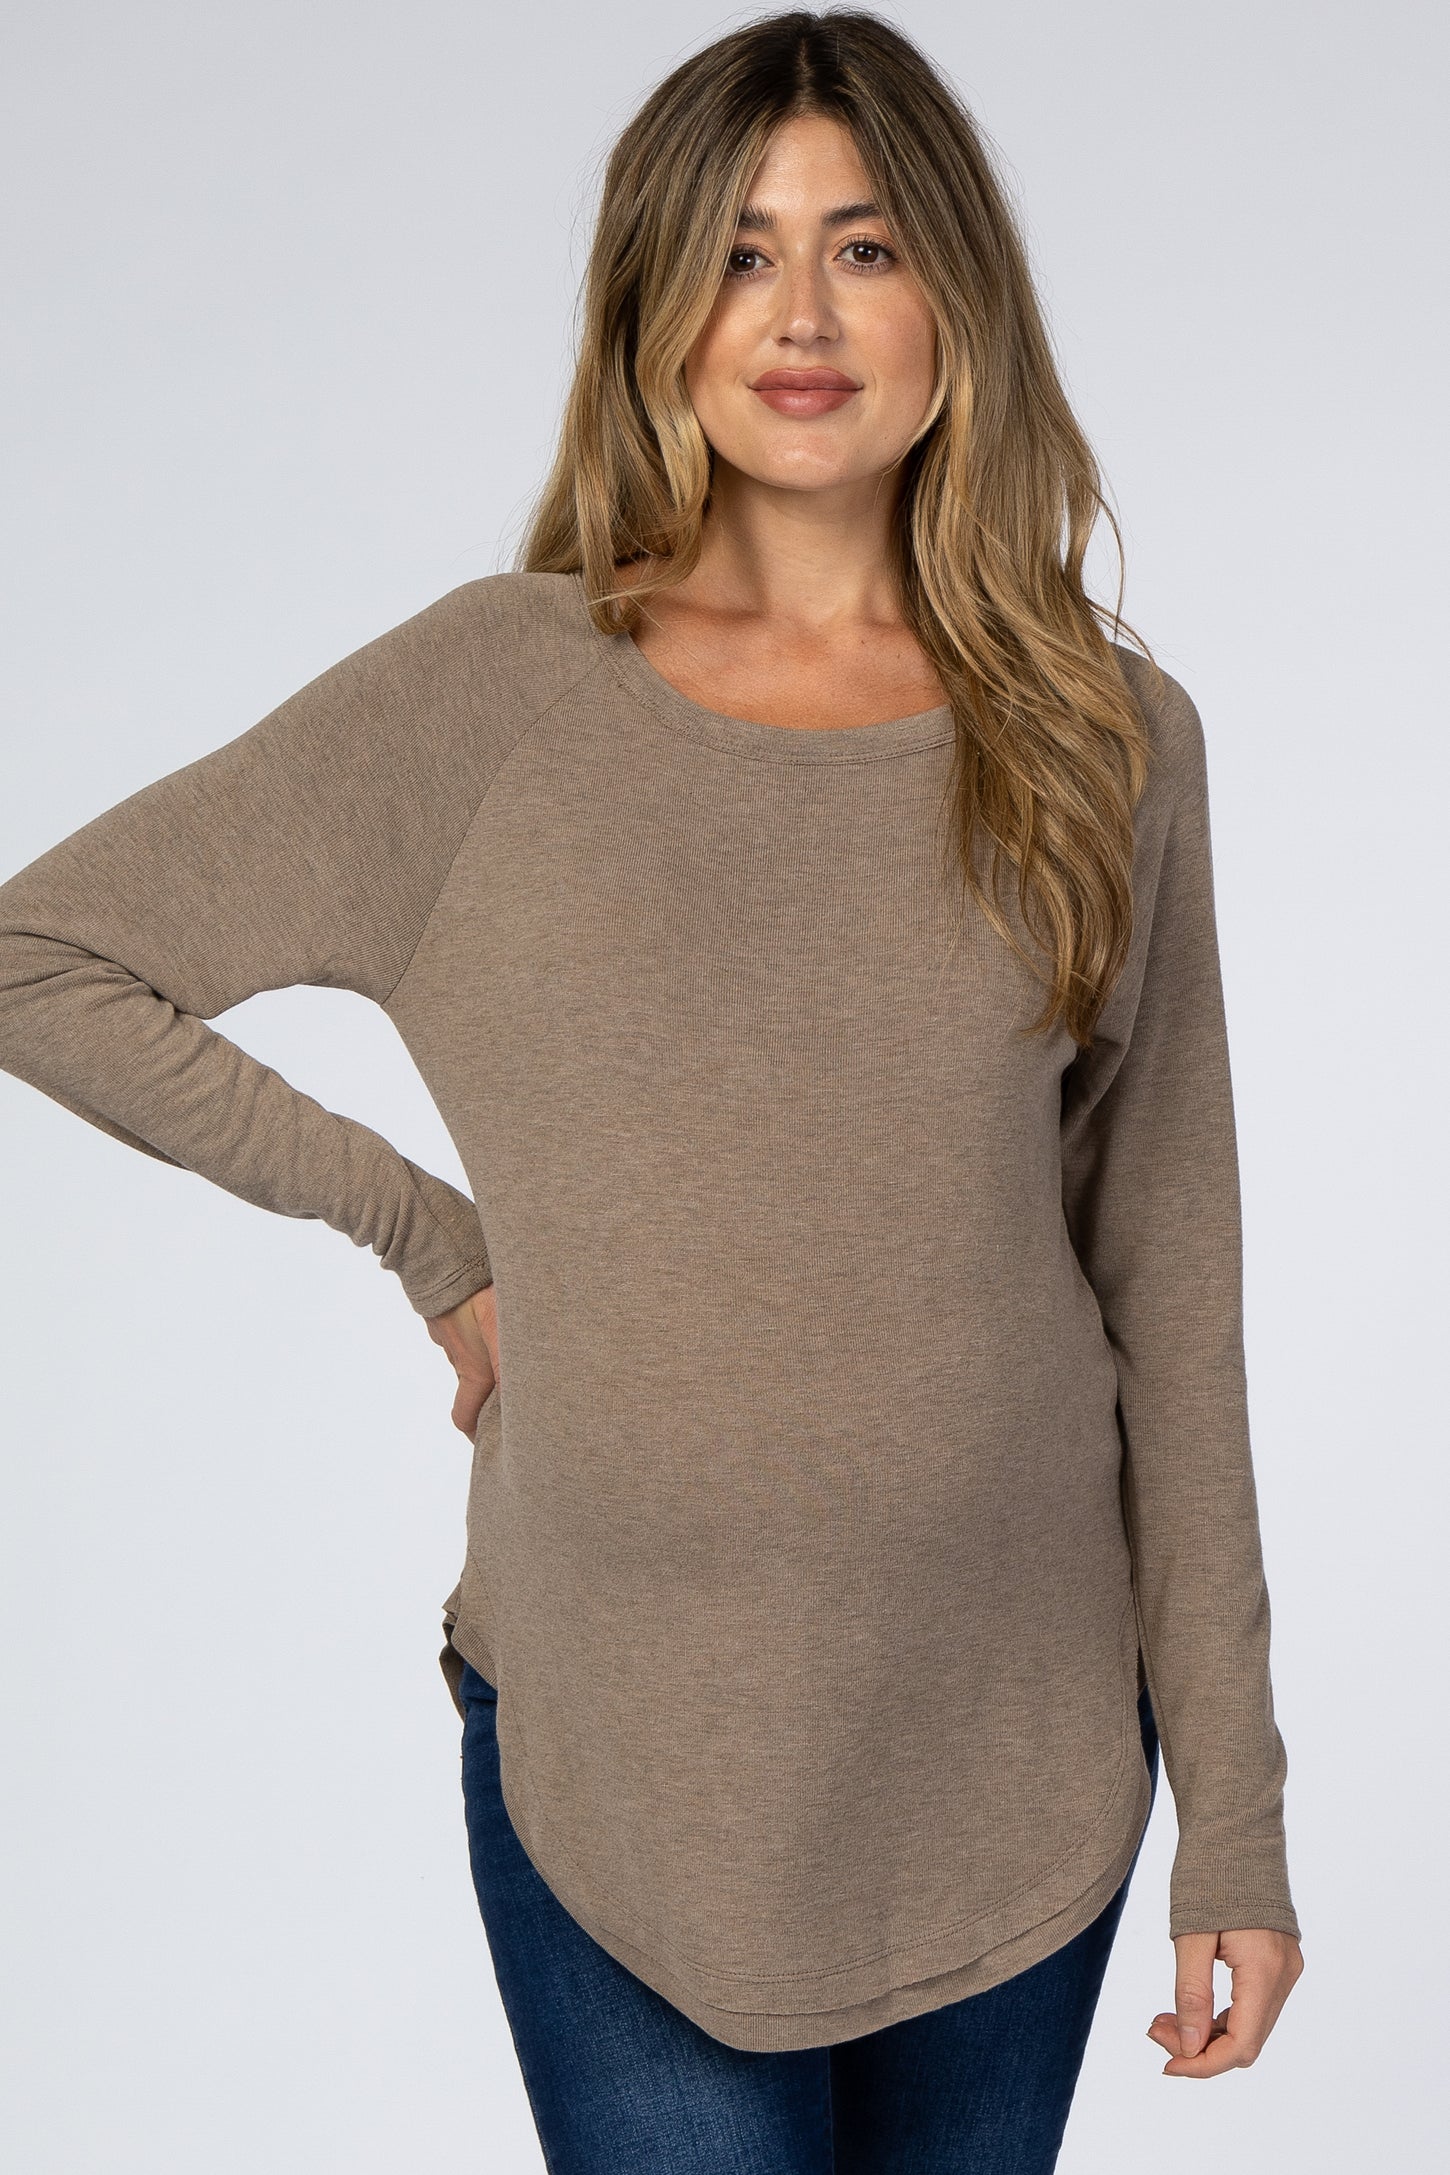 Taupe Hi-Low Rounded Raw Edge Hem Maternity Top